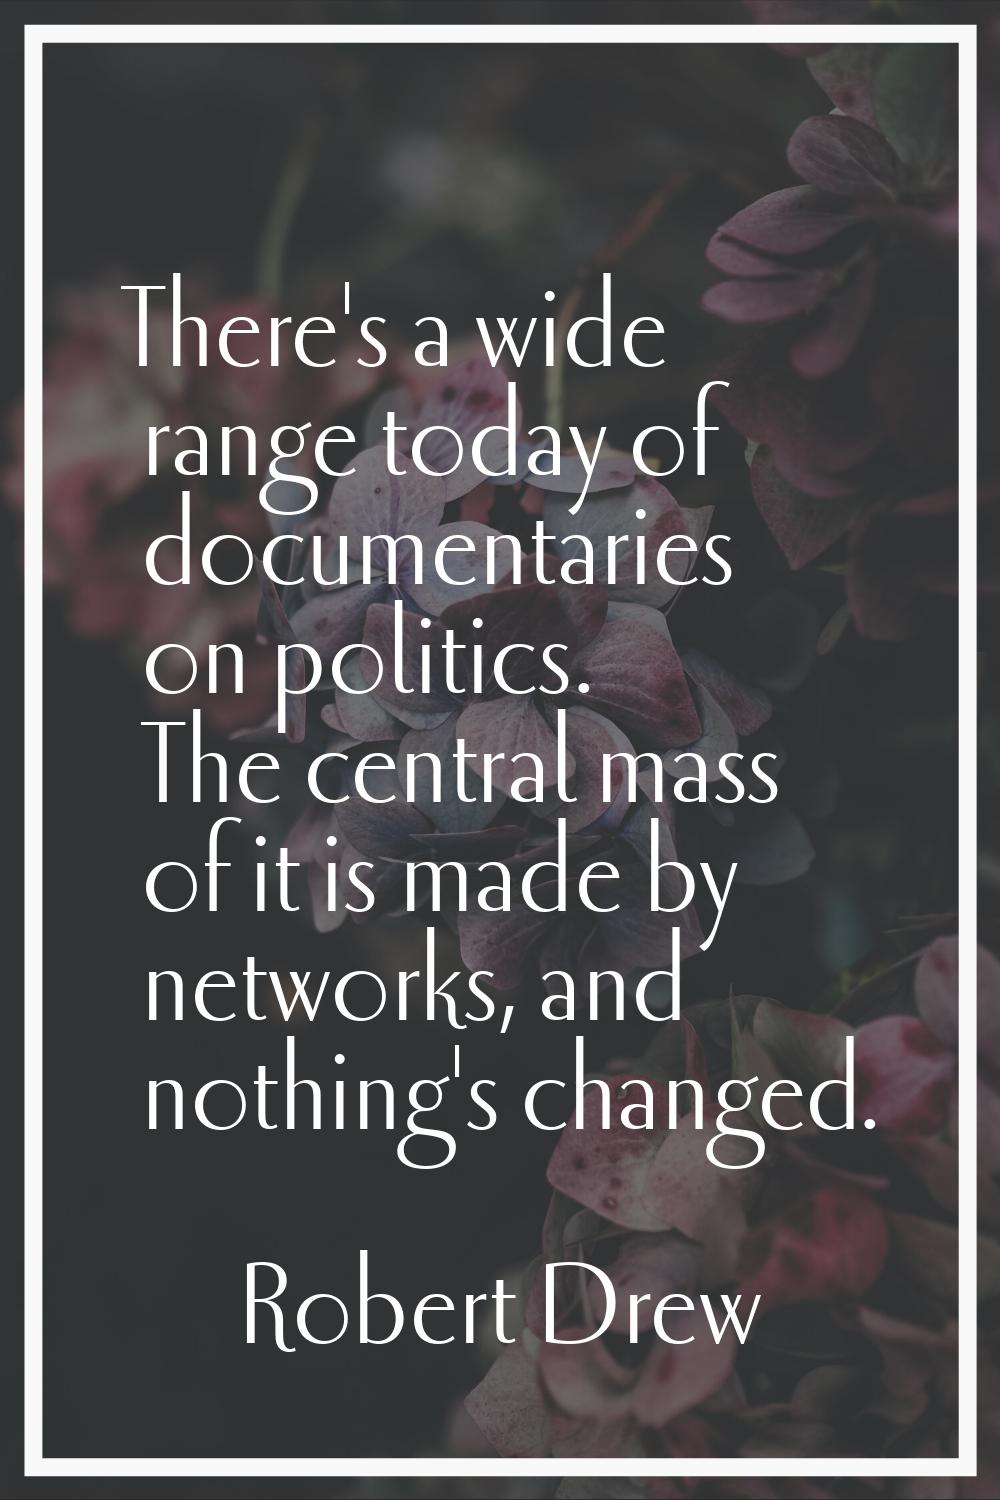 There's a wide range today of documentaries on politics. The central mass of it is made by networks